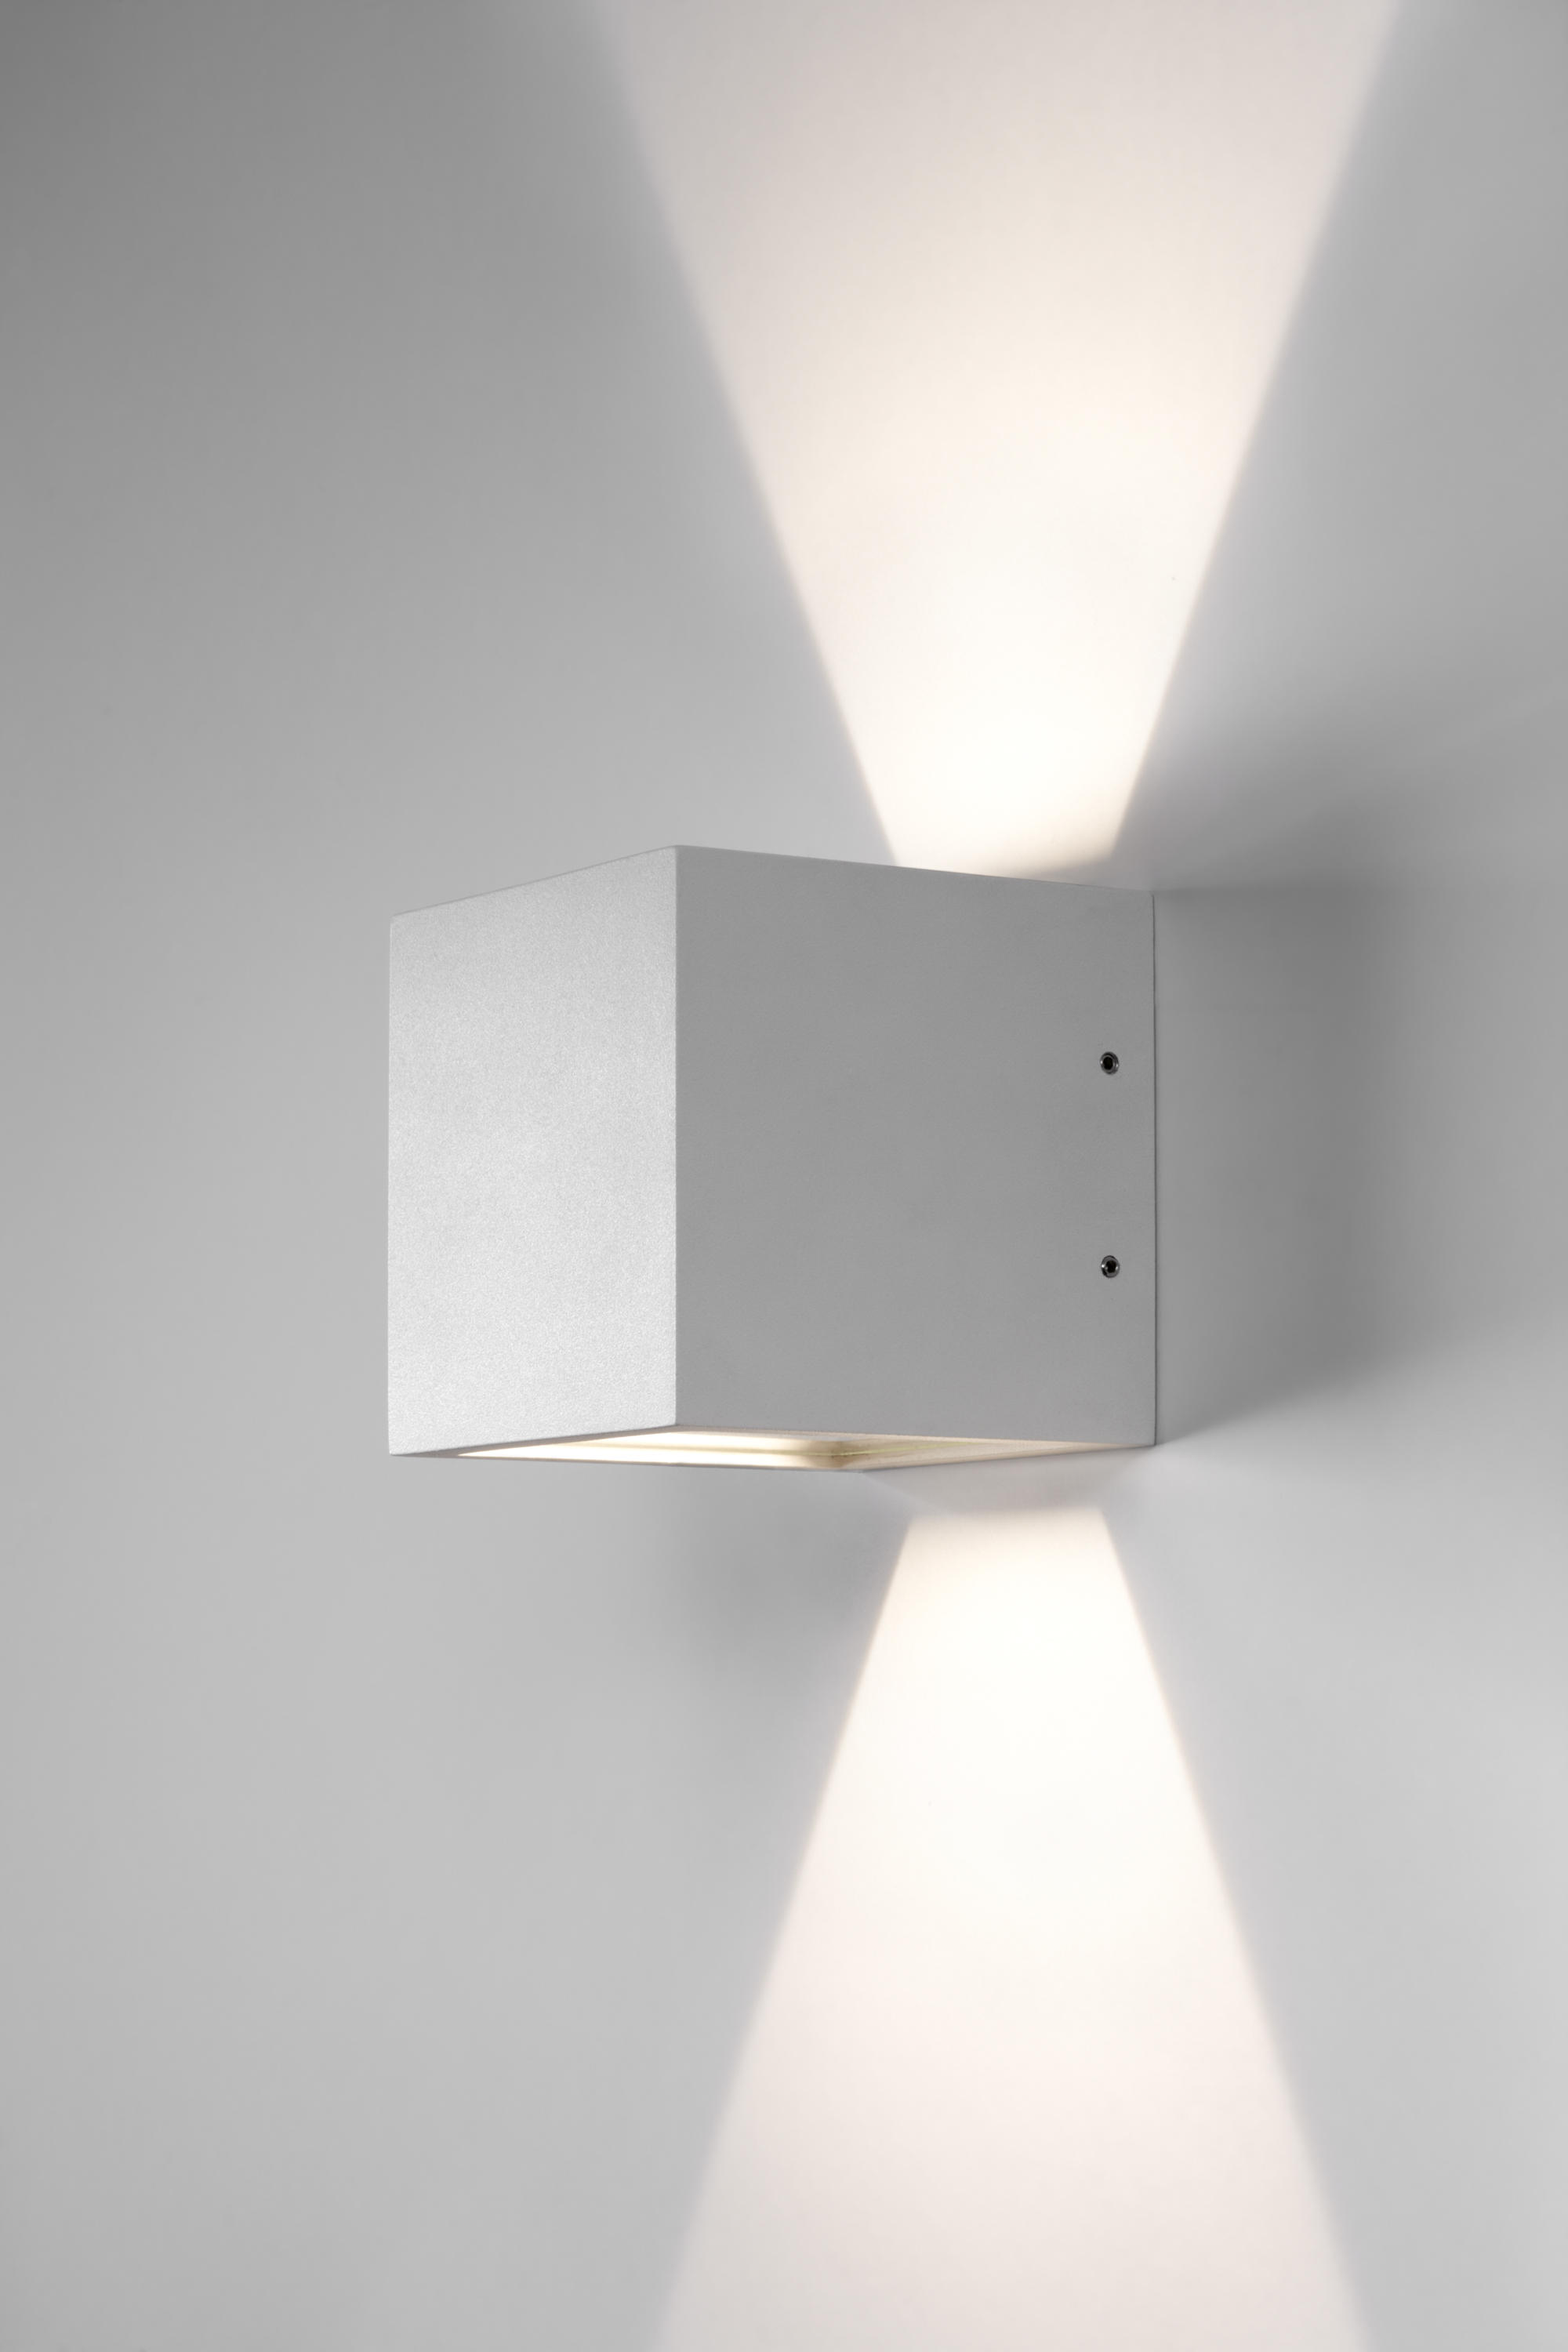 Walter Cunningham røre ved Empirisk CUBE LED - Wall lights from Light-Point | Architonic